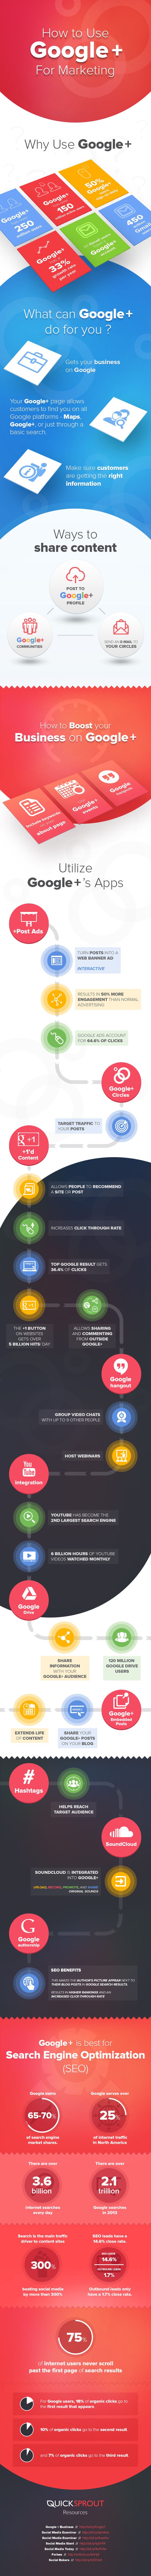 How To Incorporate #GooglePlus Into Your #SocialMedia #Marketing Strategy - #infographic